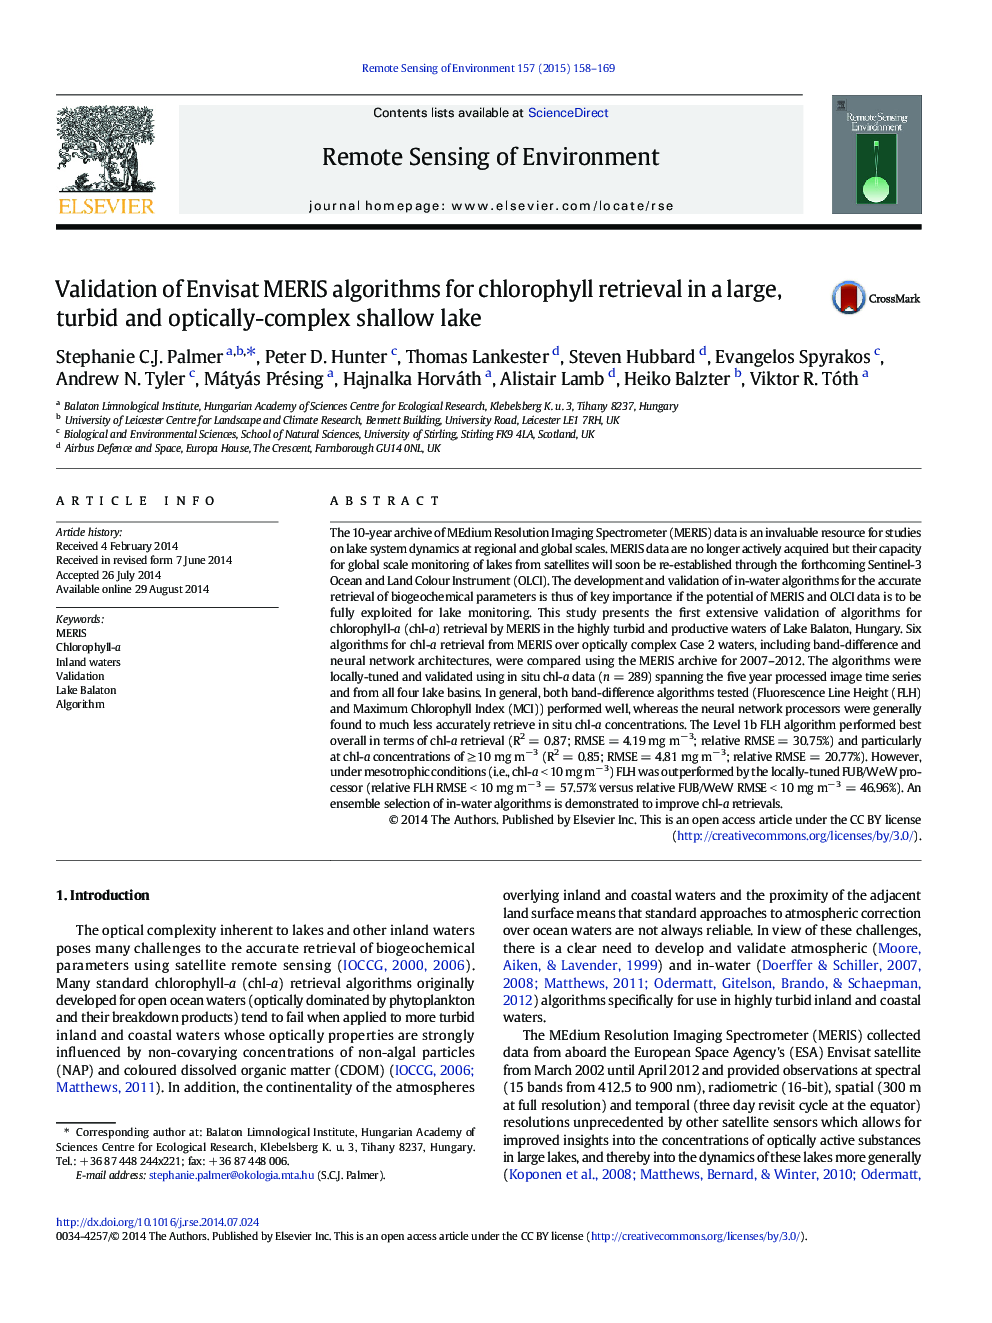 Validation of Envisat MERIS algorithms for chlorophyll retrieval in a large, turbid and optically-complex shallow lake